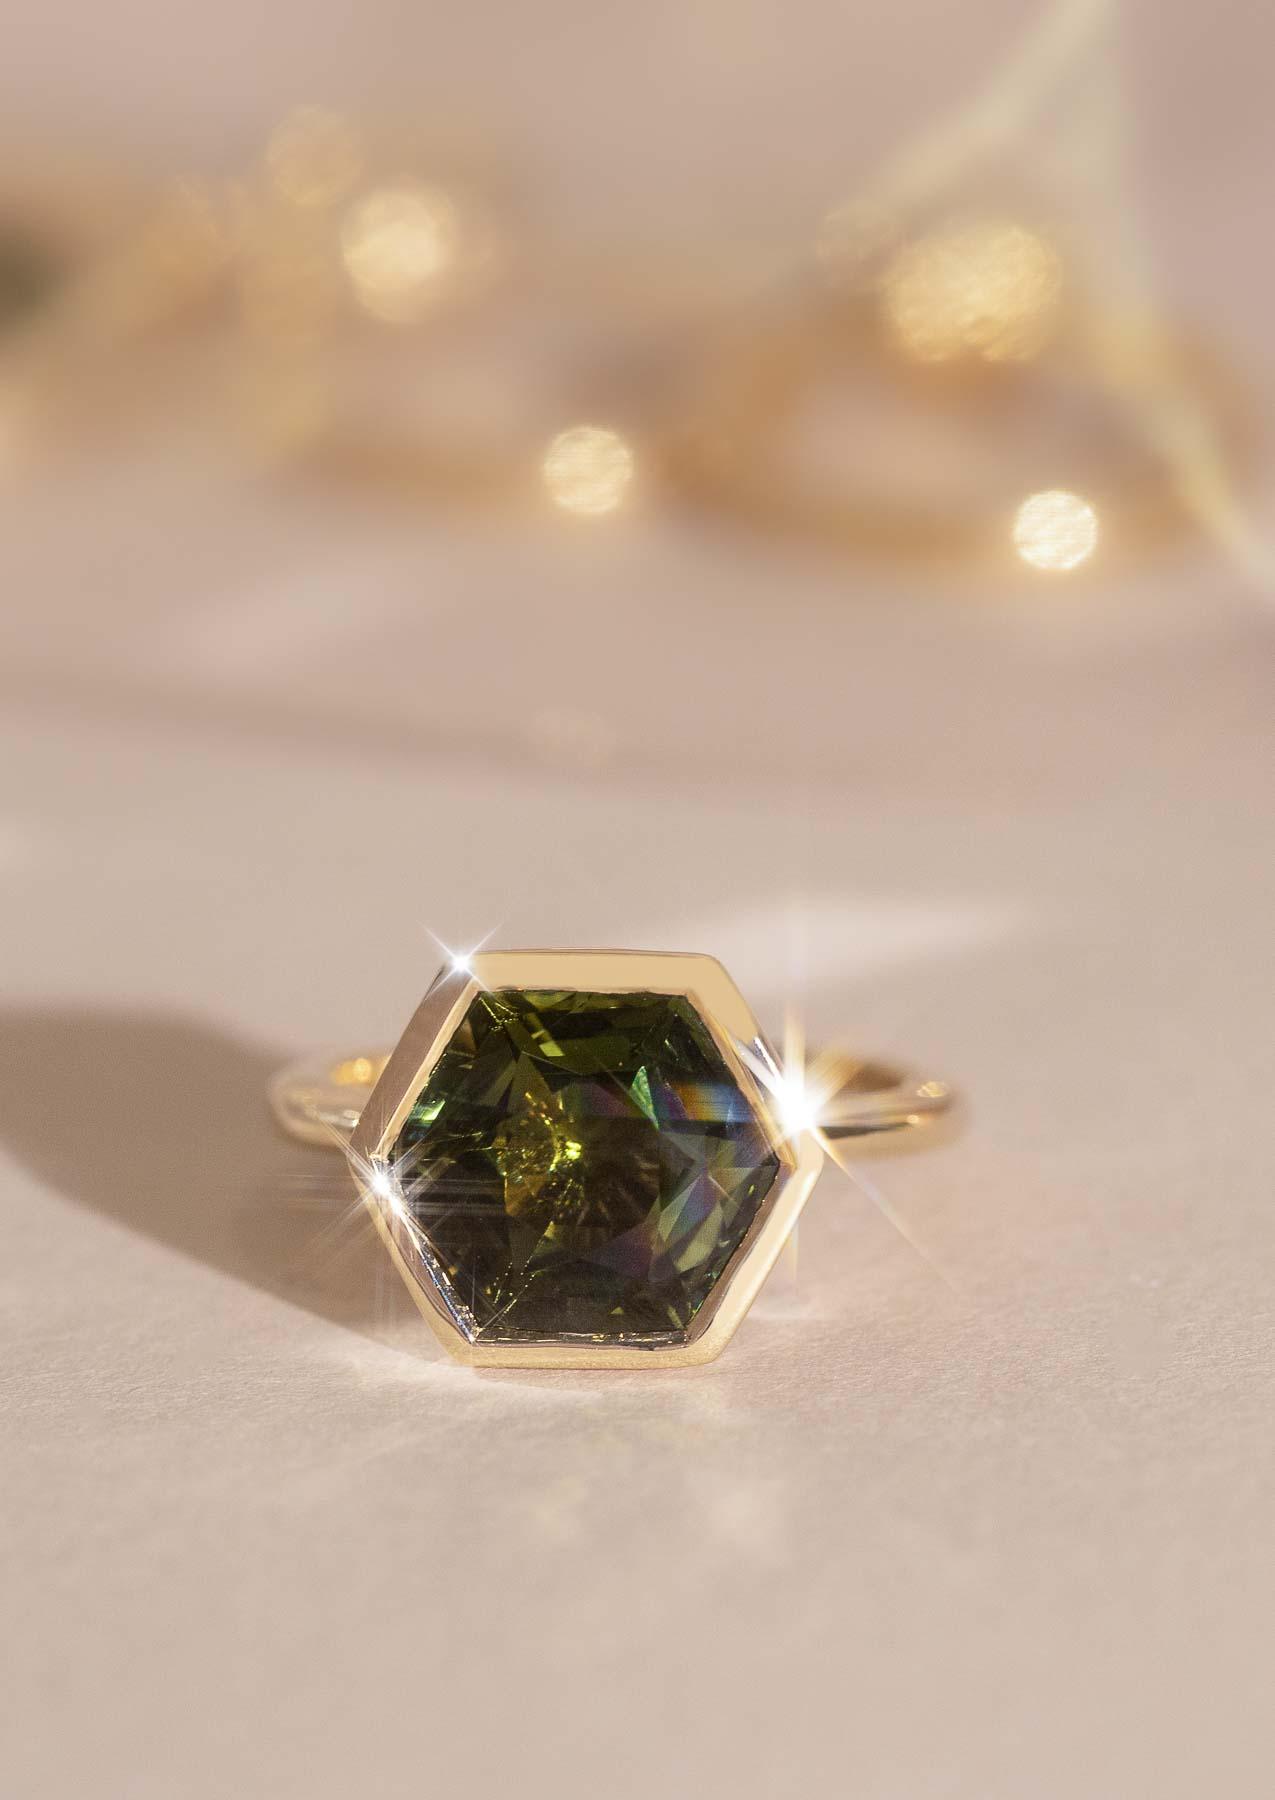 The Patrisse 4.51ct Tourmaline Ring - Molten Store